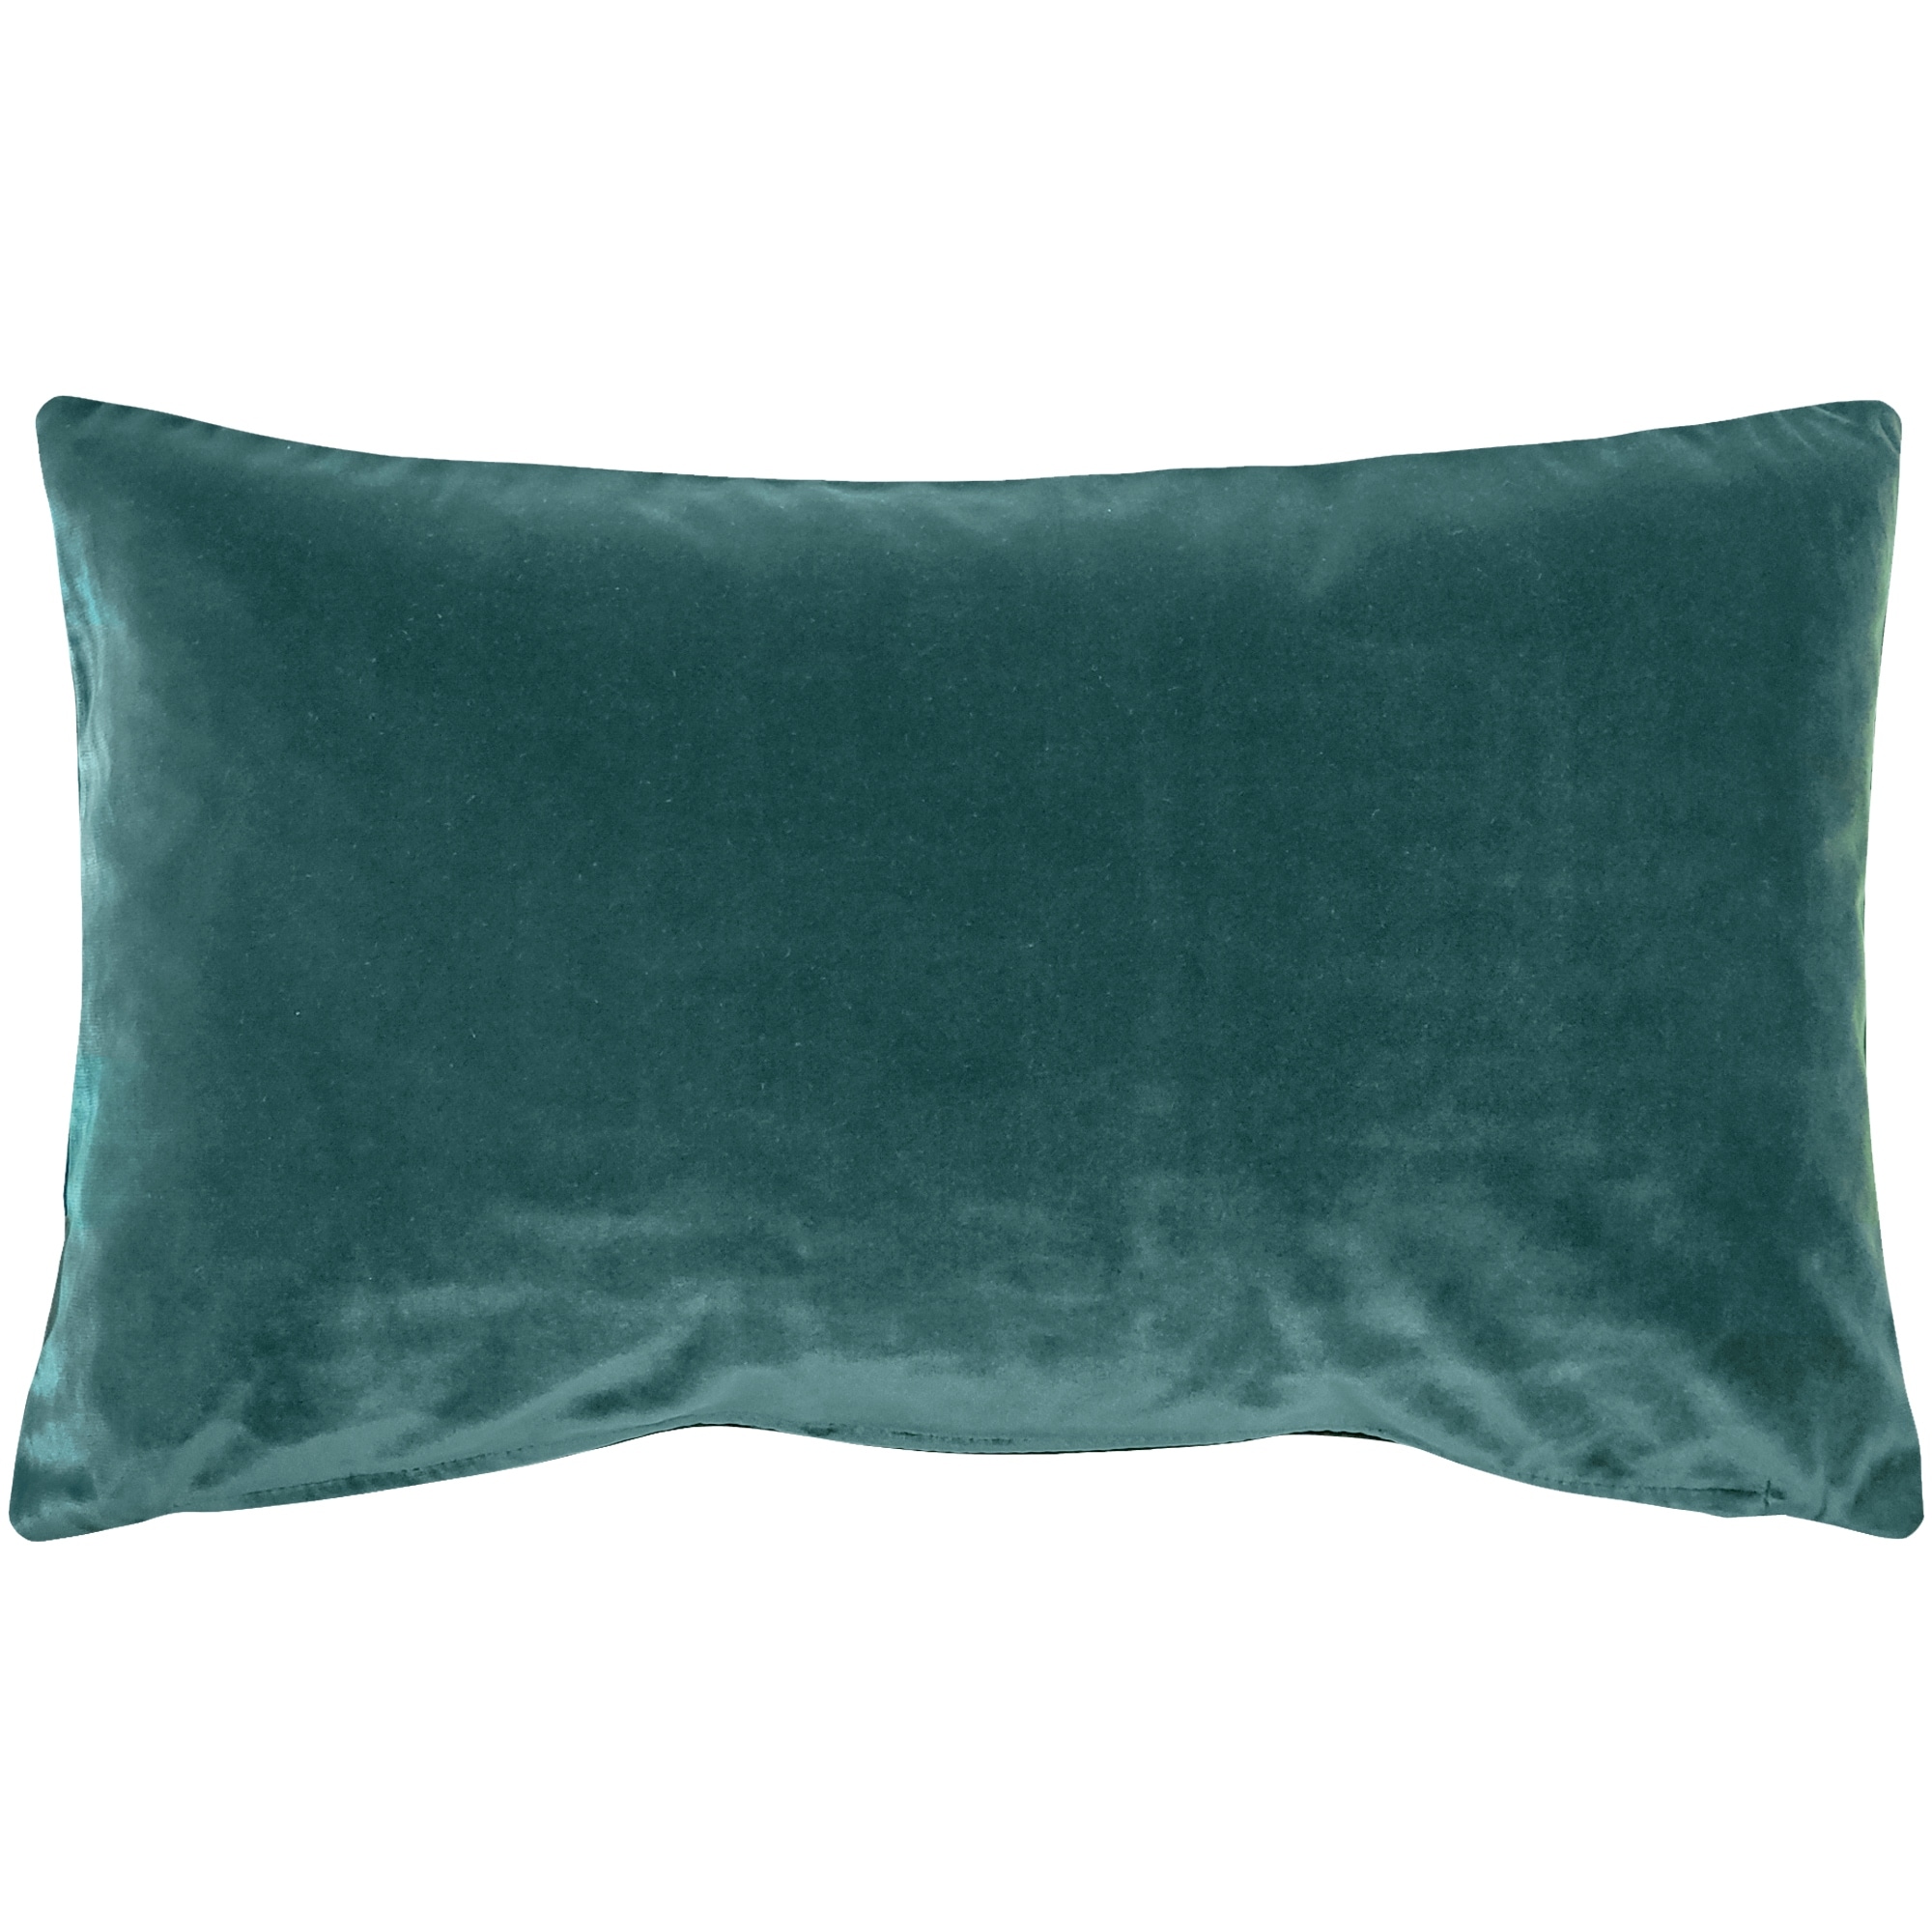 https://ak1.ostkcdn.com/images/products/is/images/direct/f2ad596b69c8b46dad81100730a903a6a4c69eb6/Pillow-Decor-Castello-Soft-Velvet-Throw-Pillows-%283-Sizes%2C-18-Colors%29.jpg